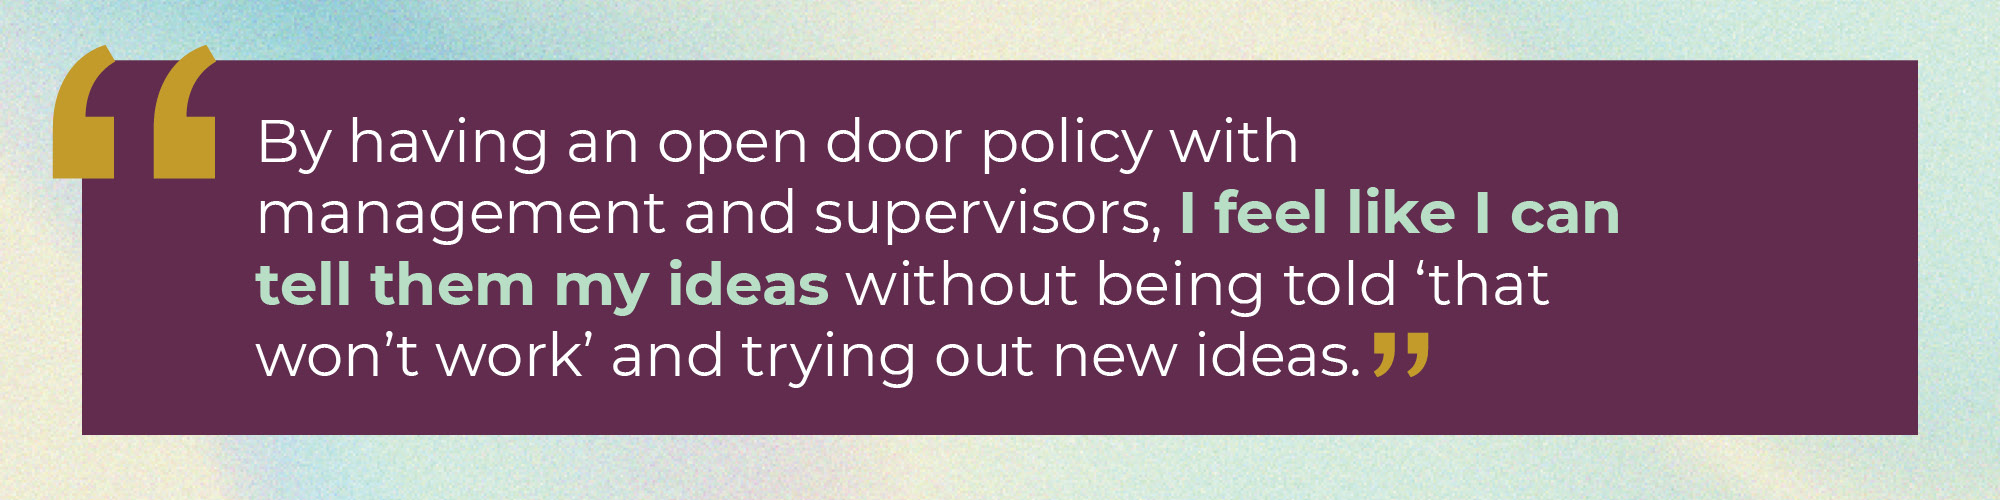 quote image about ucs healthcare's open door policy.